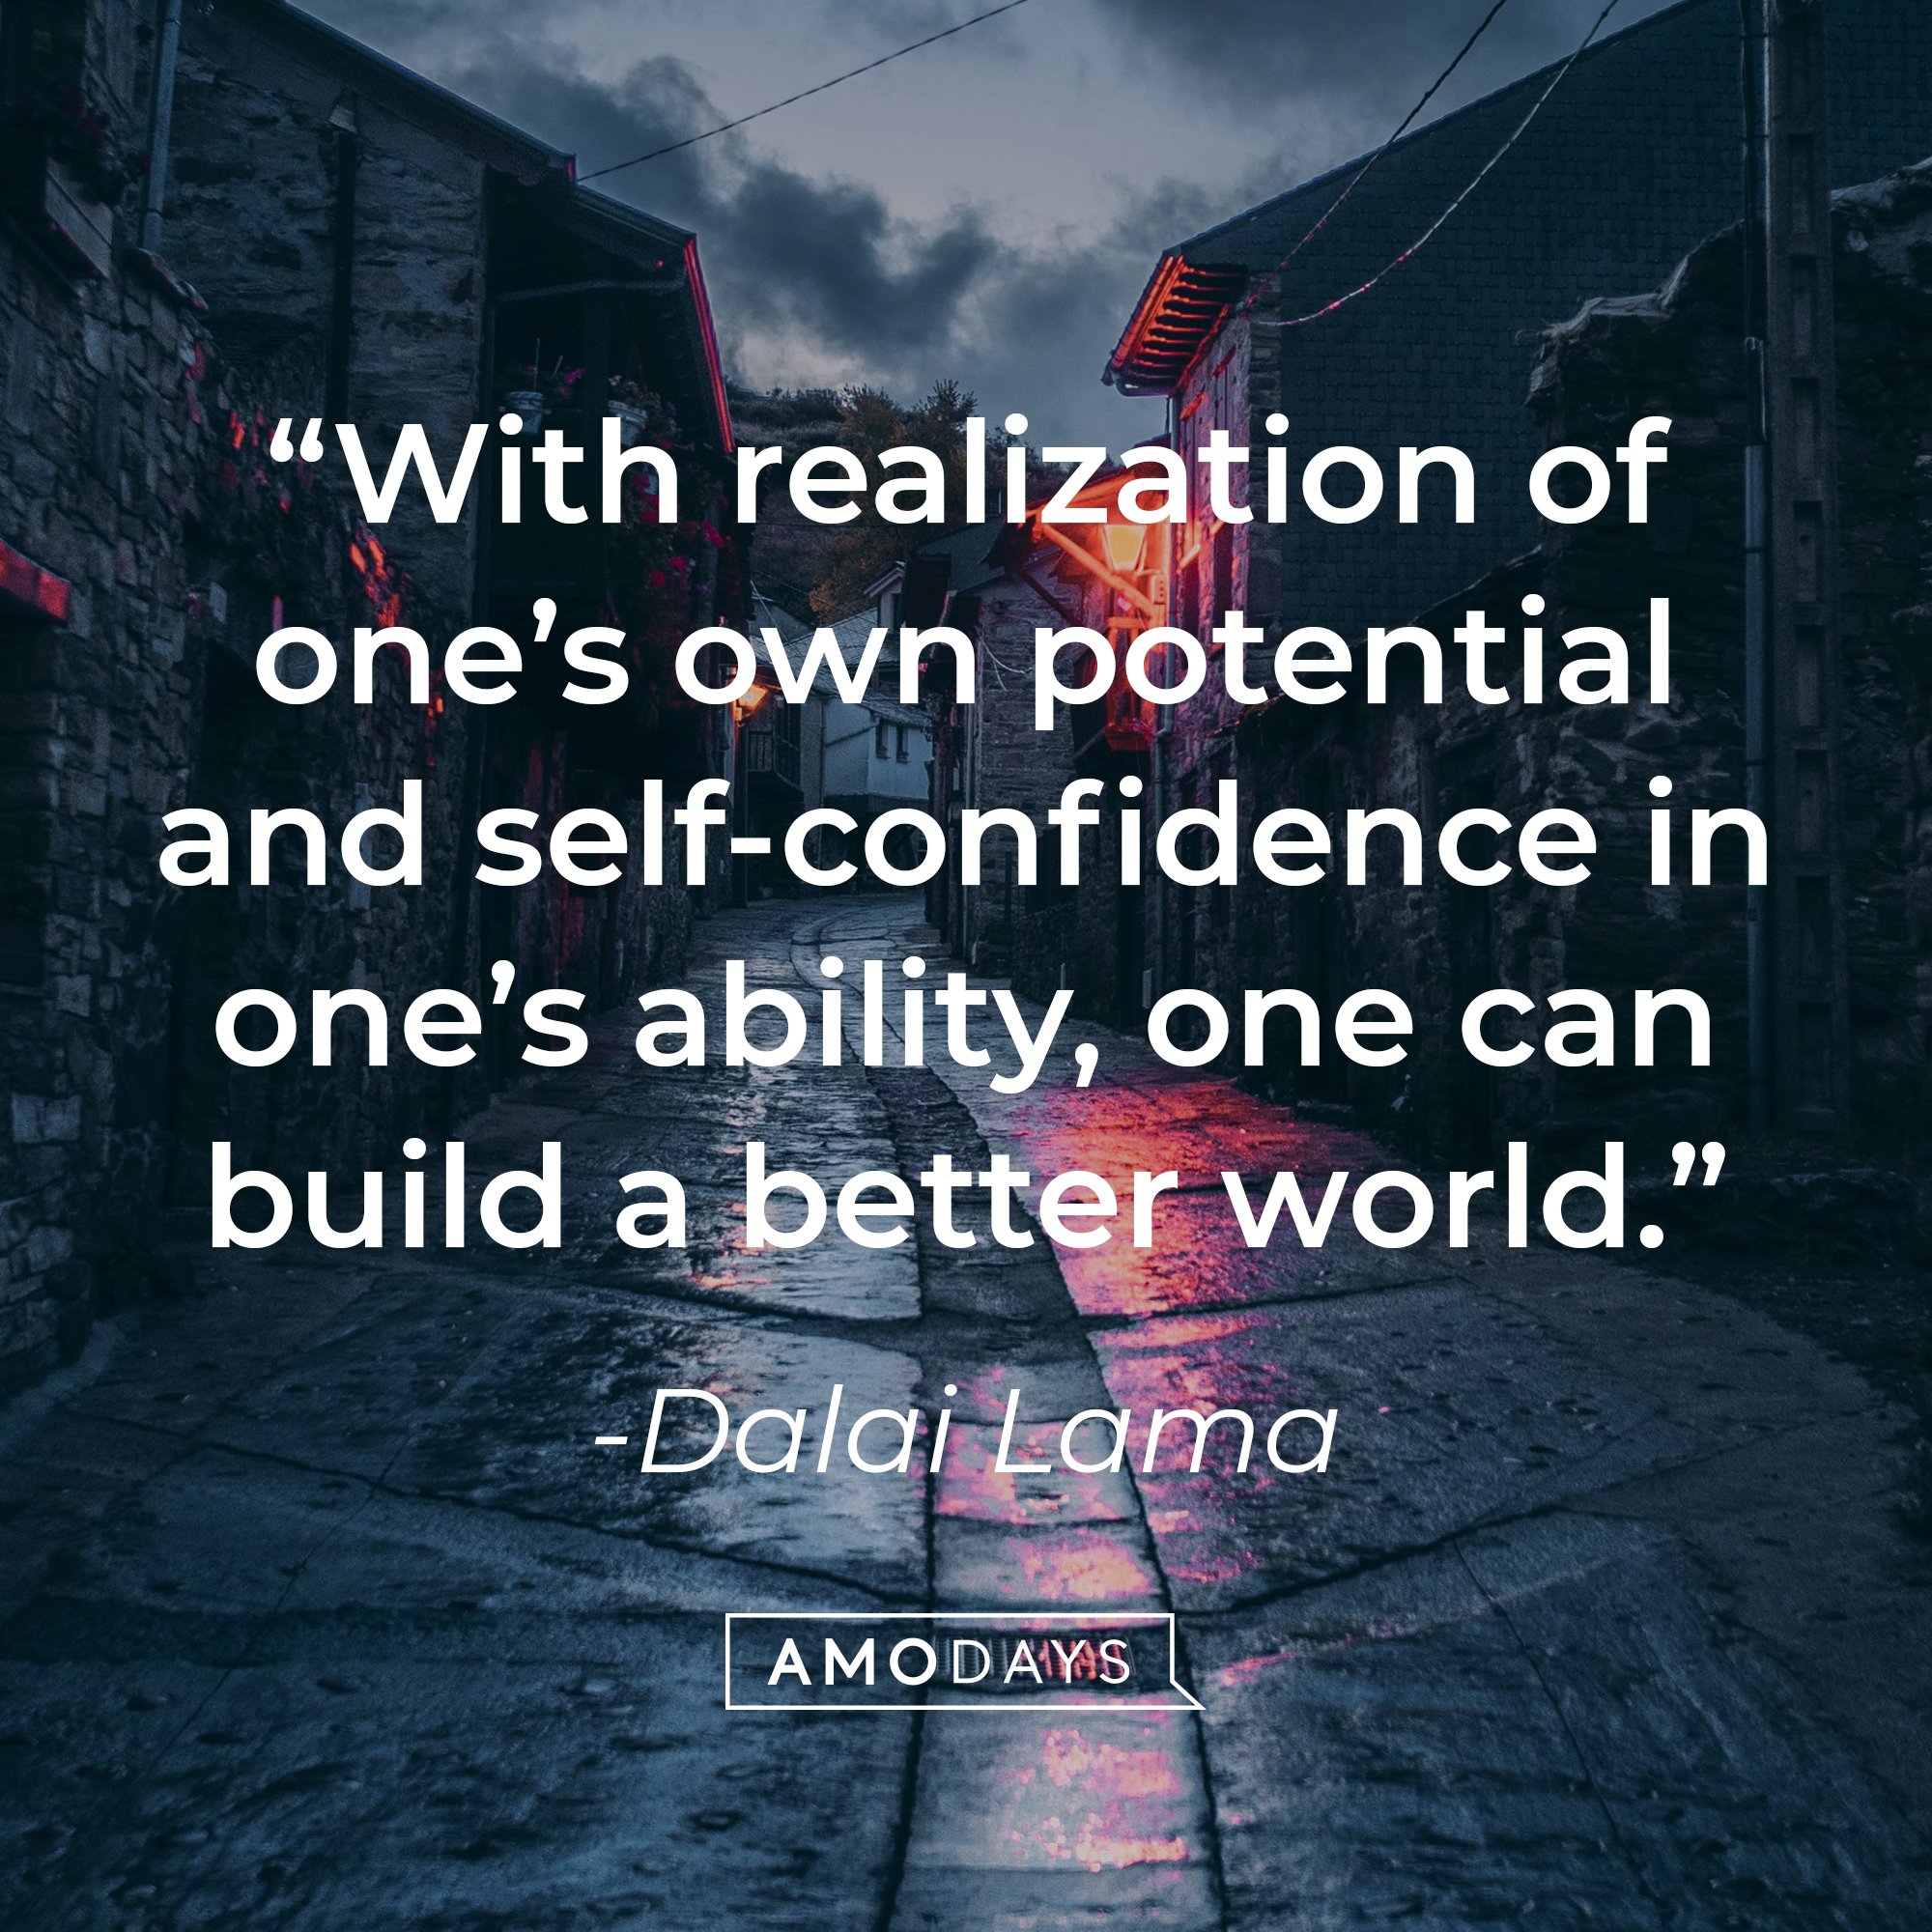  Dalai Lama's quote: “With realization of one’s own potential and self-confidence in one’s ability, one can build a better world.” | image: AmoDays